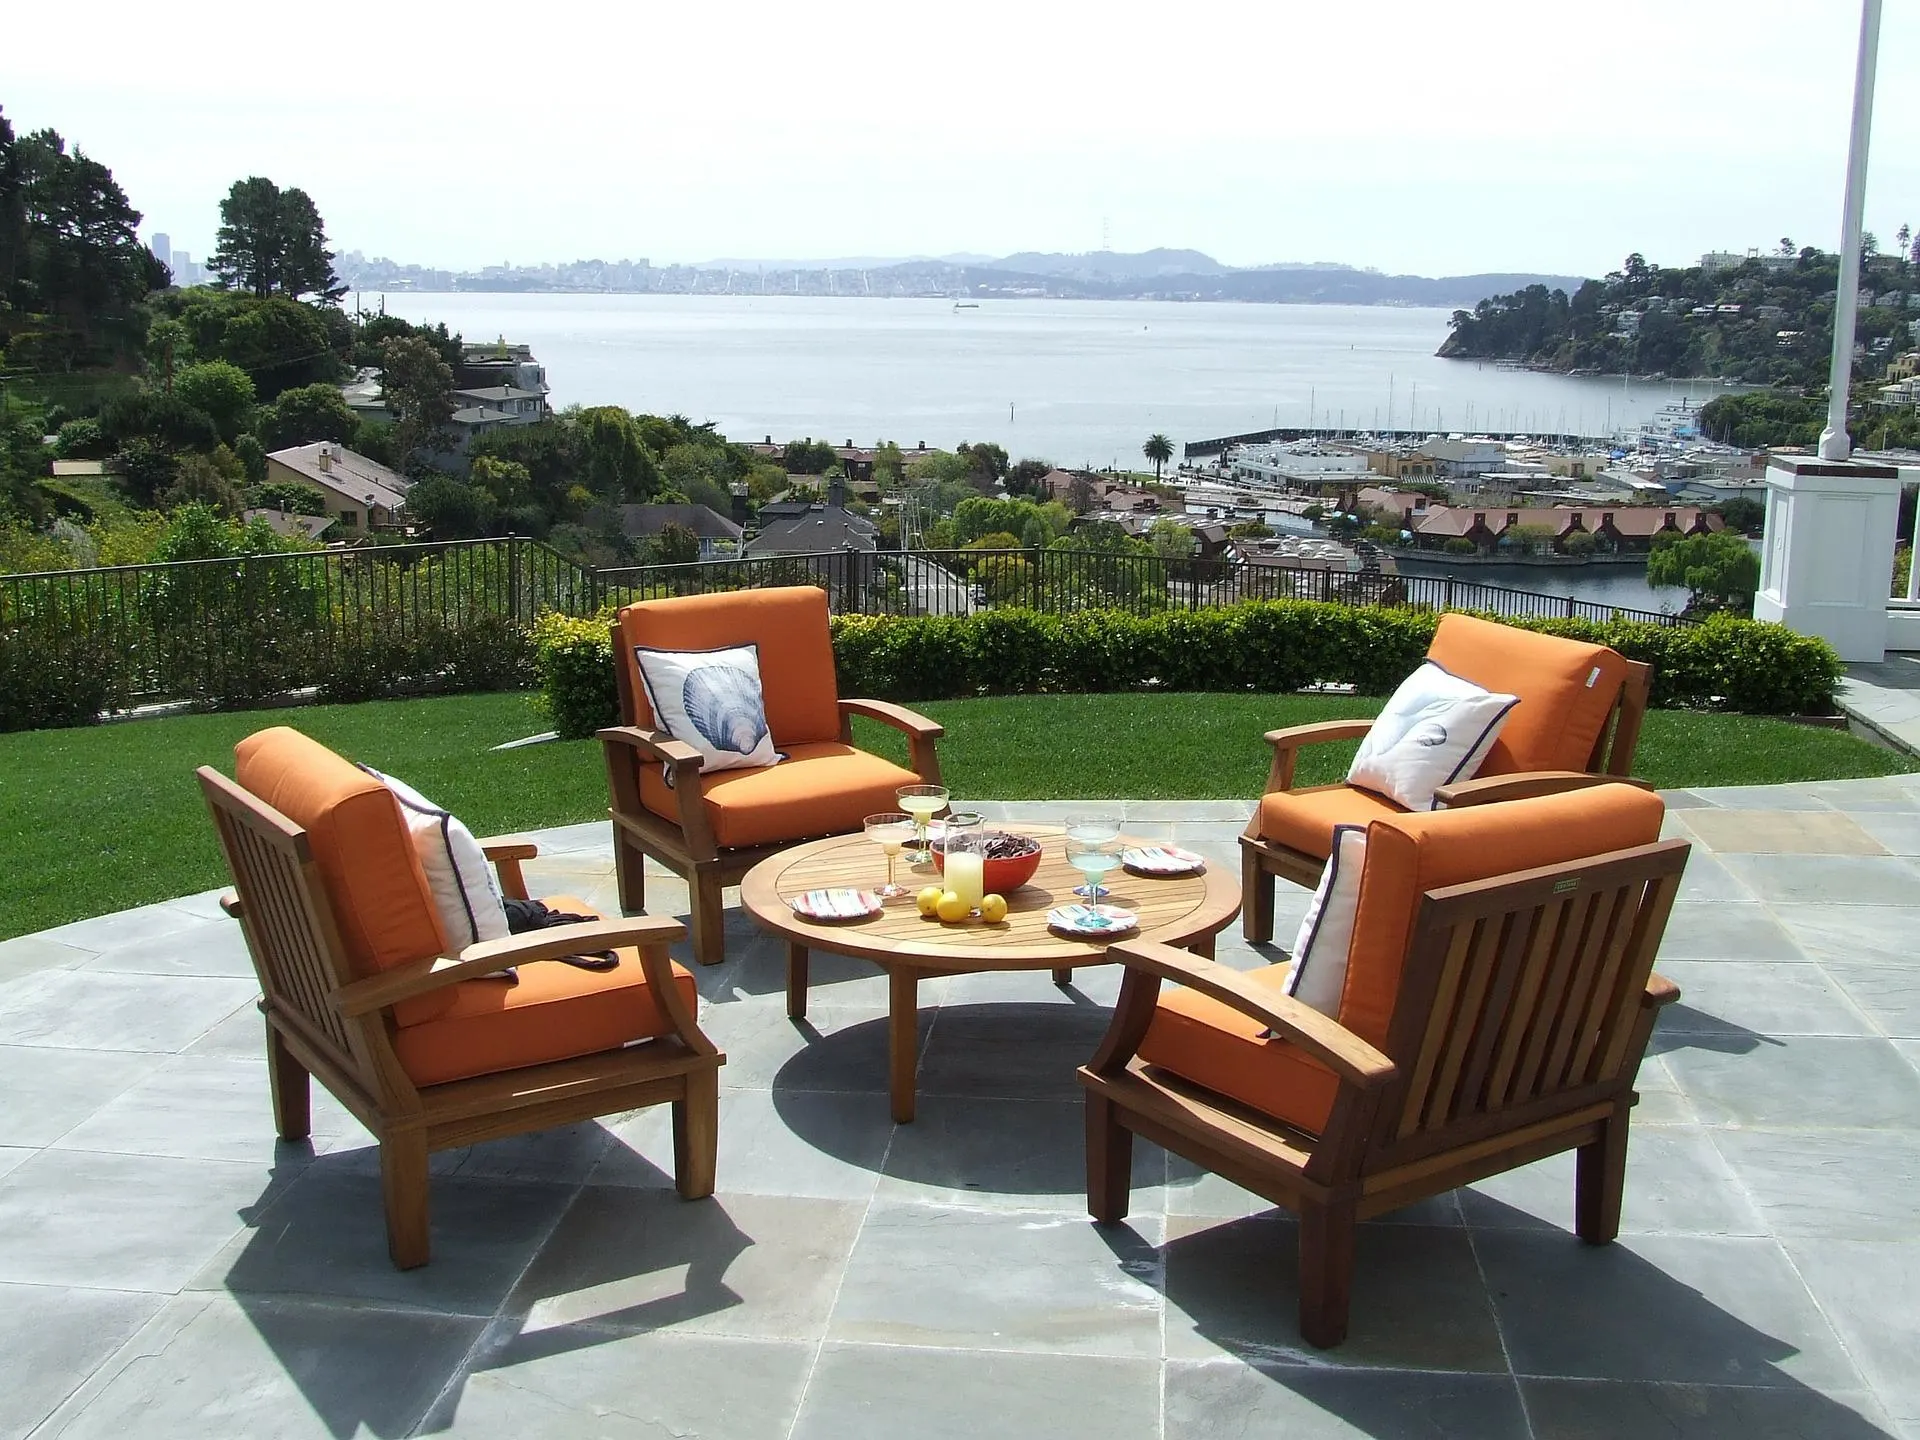 UK garden furniture. What to pay attention to when buying it?